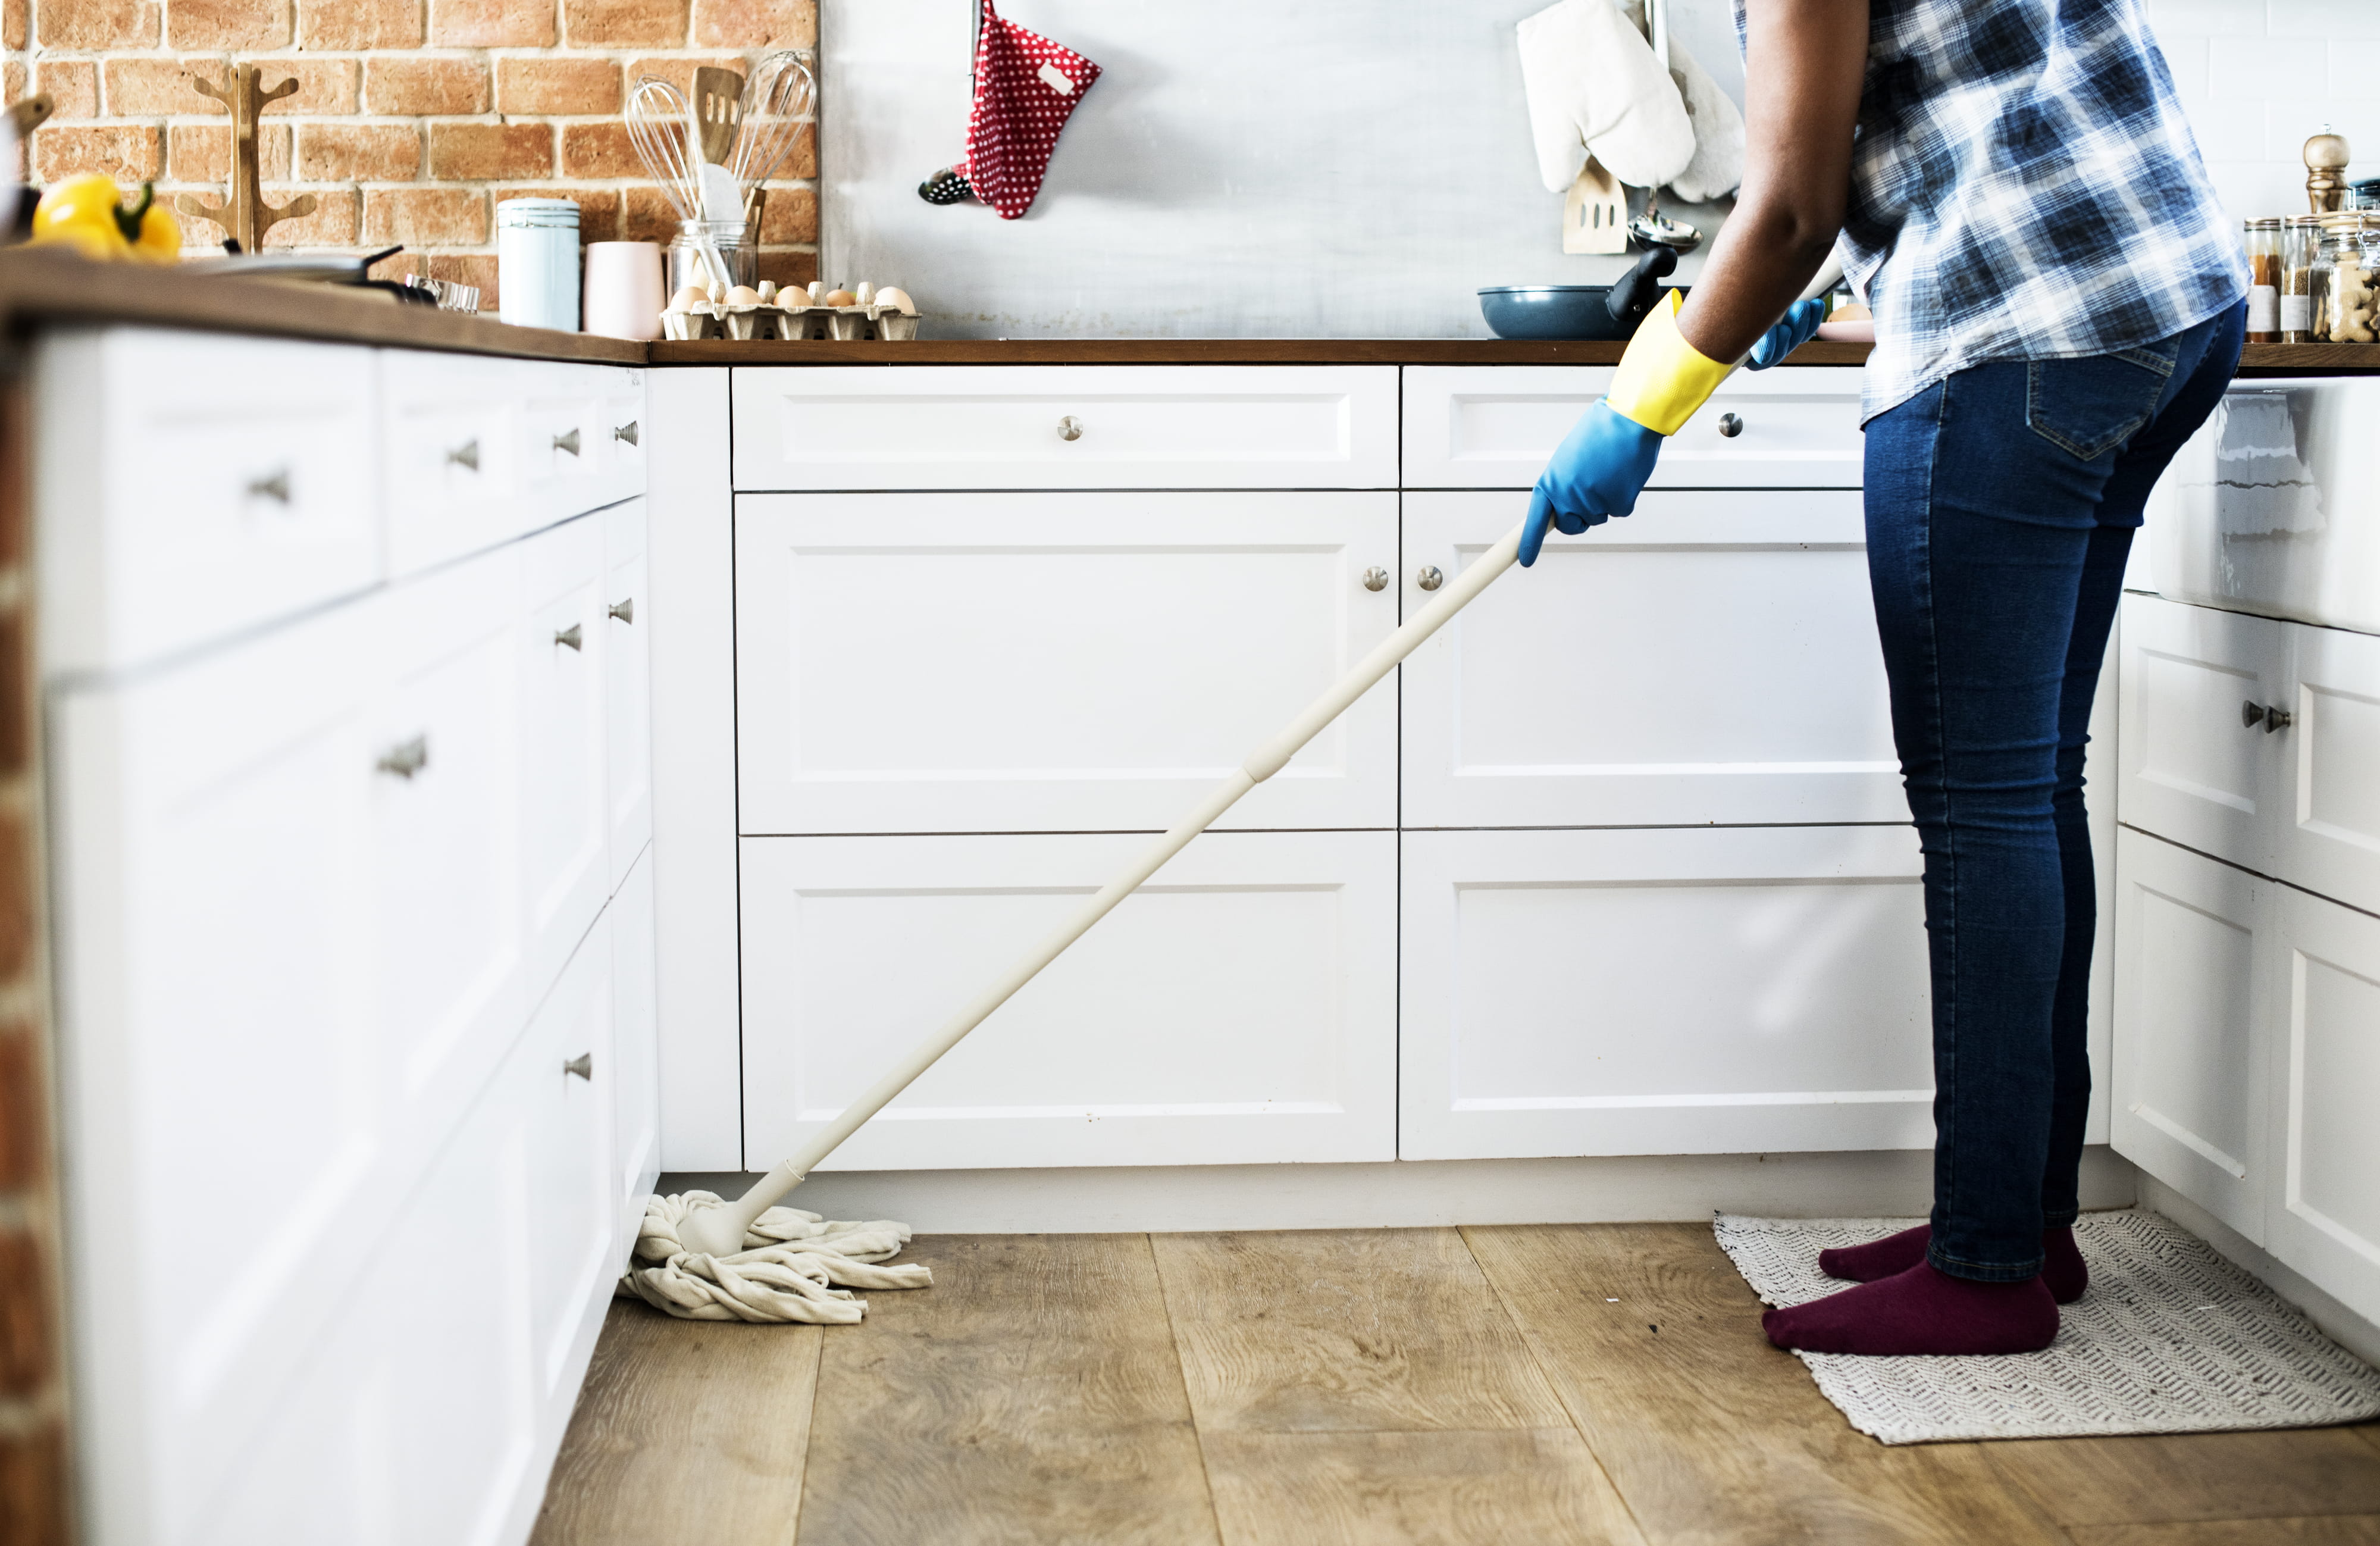 Person Using Mop on Floor, chores, cleaning, contemporary, domestic